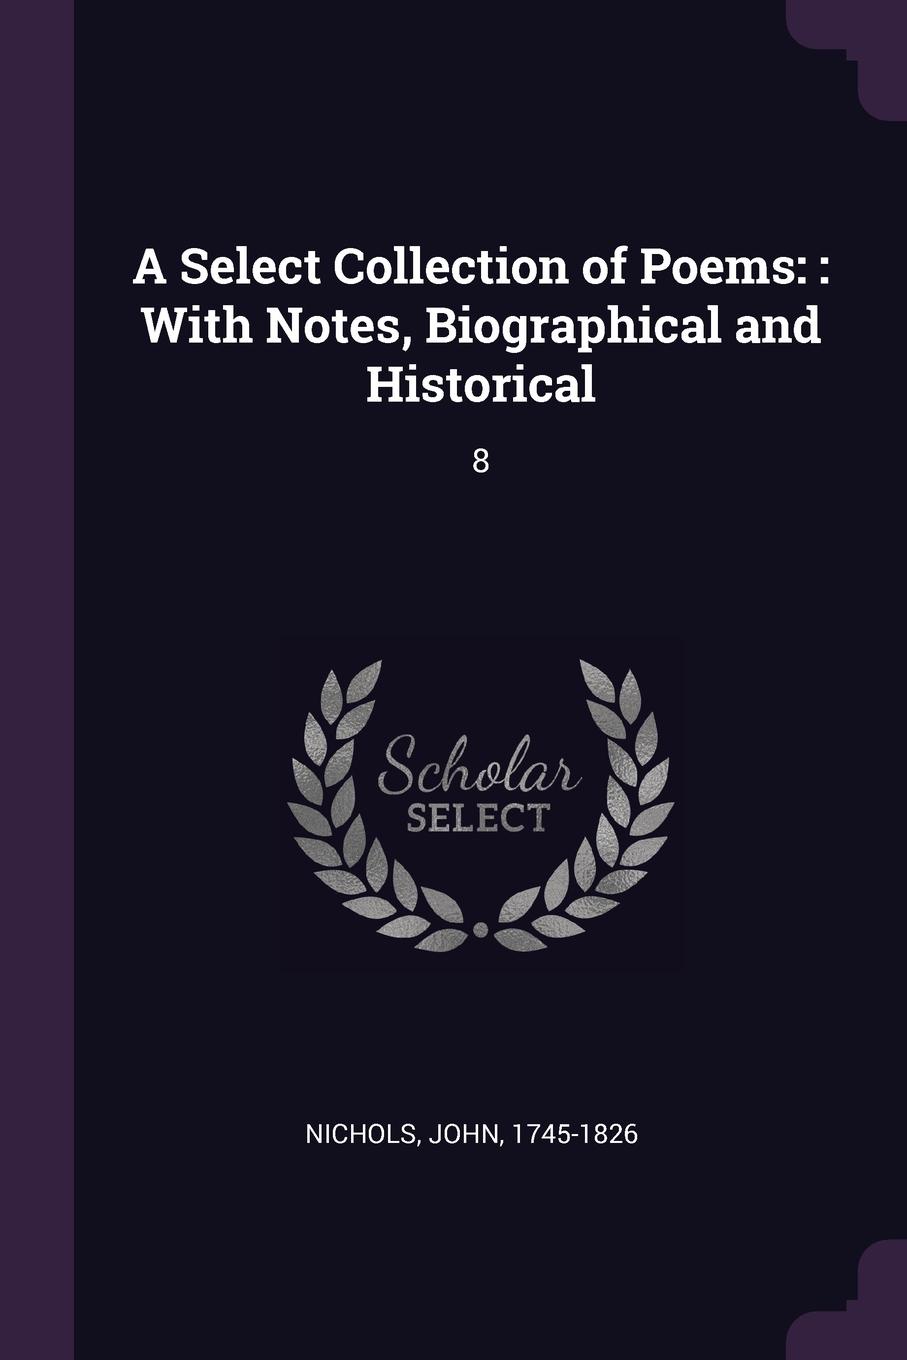 A Select Collection of Poems. : With Notes, Biographical and Historical: 8